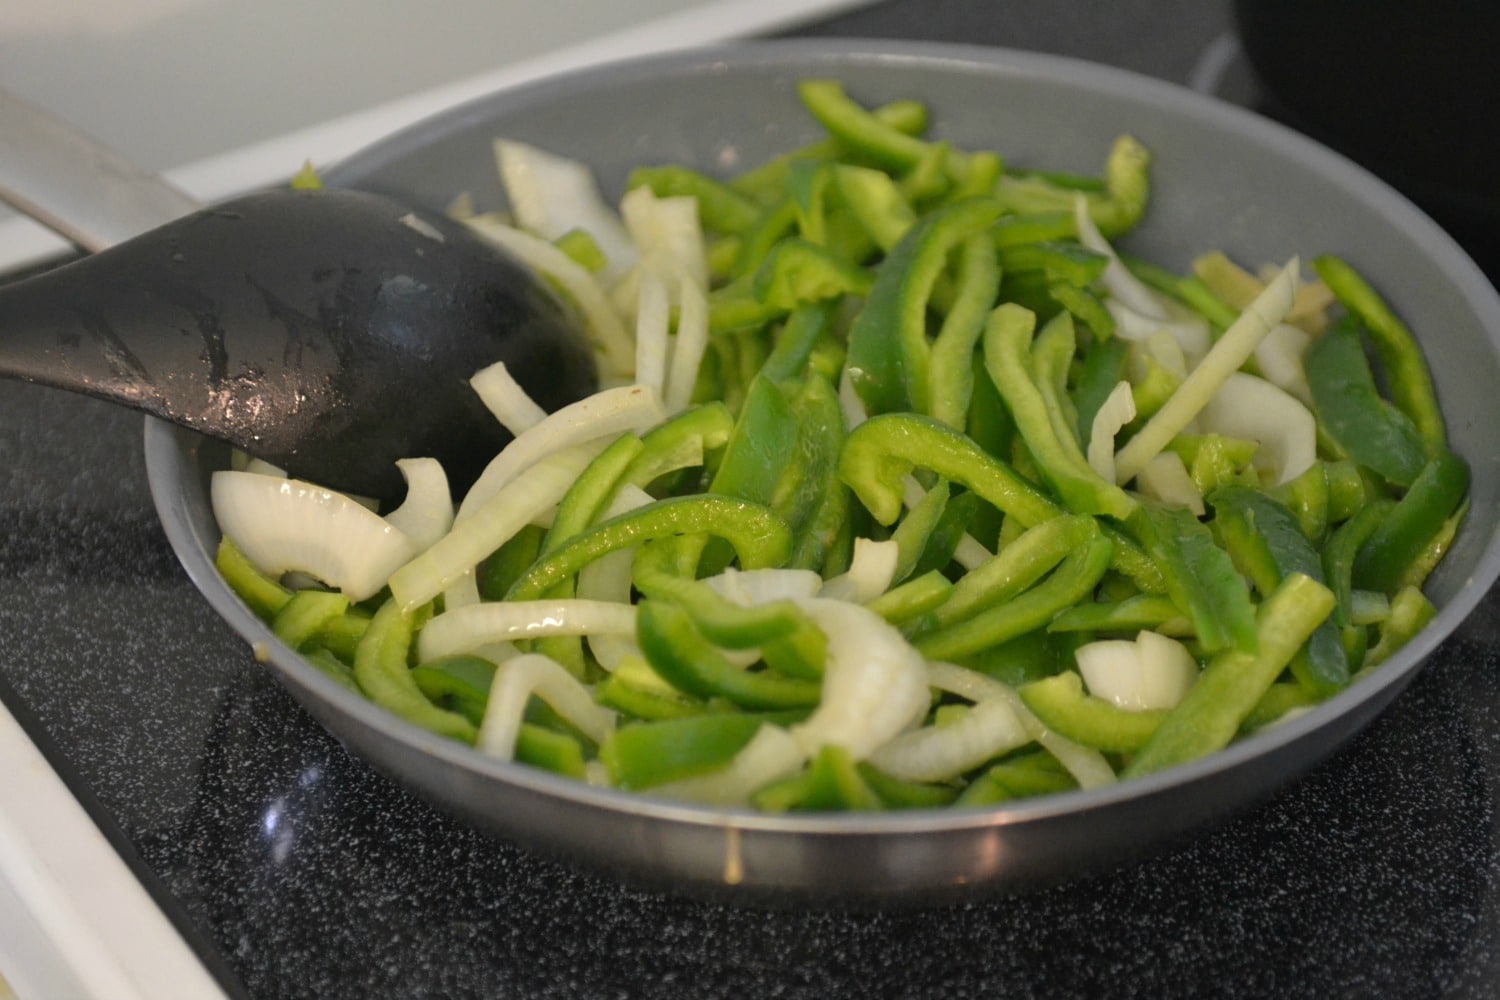 Saute the peppers and onions over medium heat. 